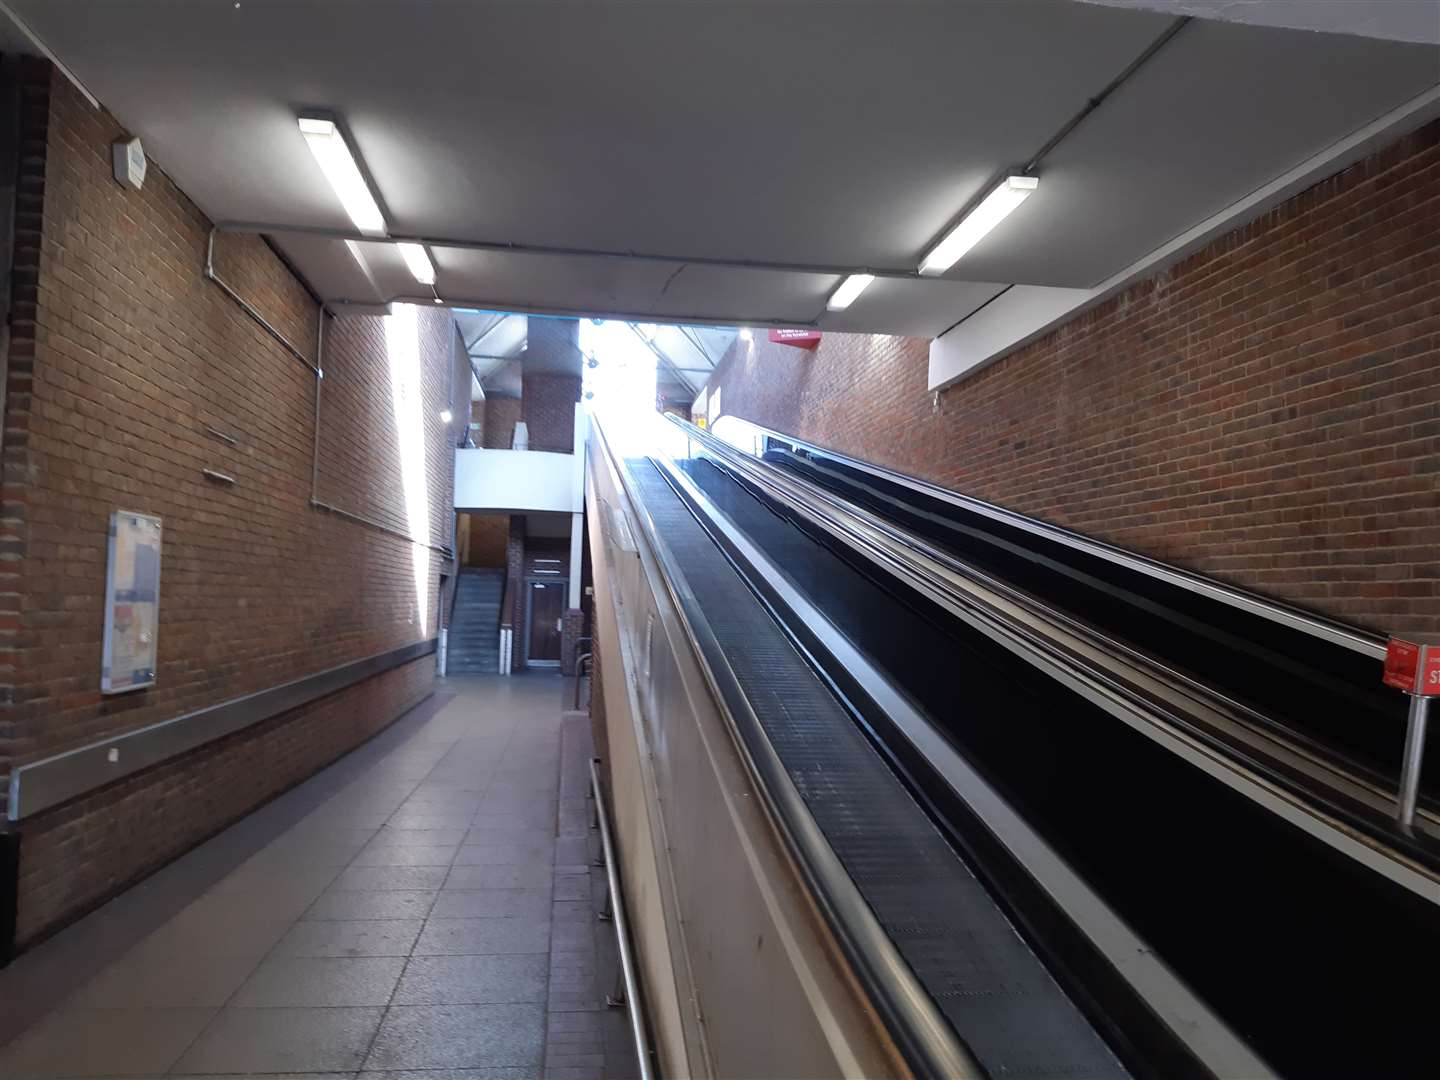 The Park Mall escalators are now out of bounds